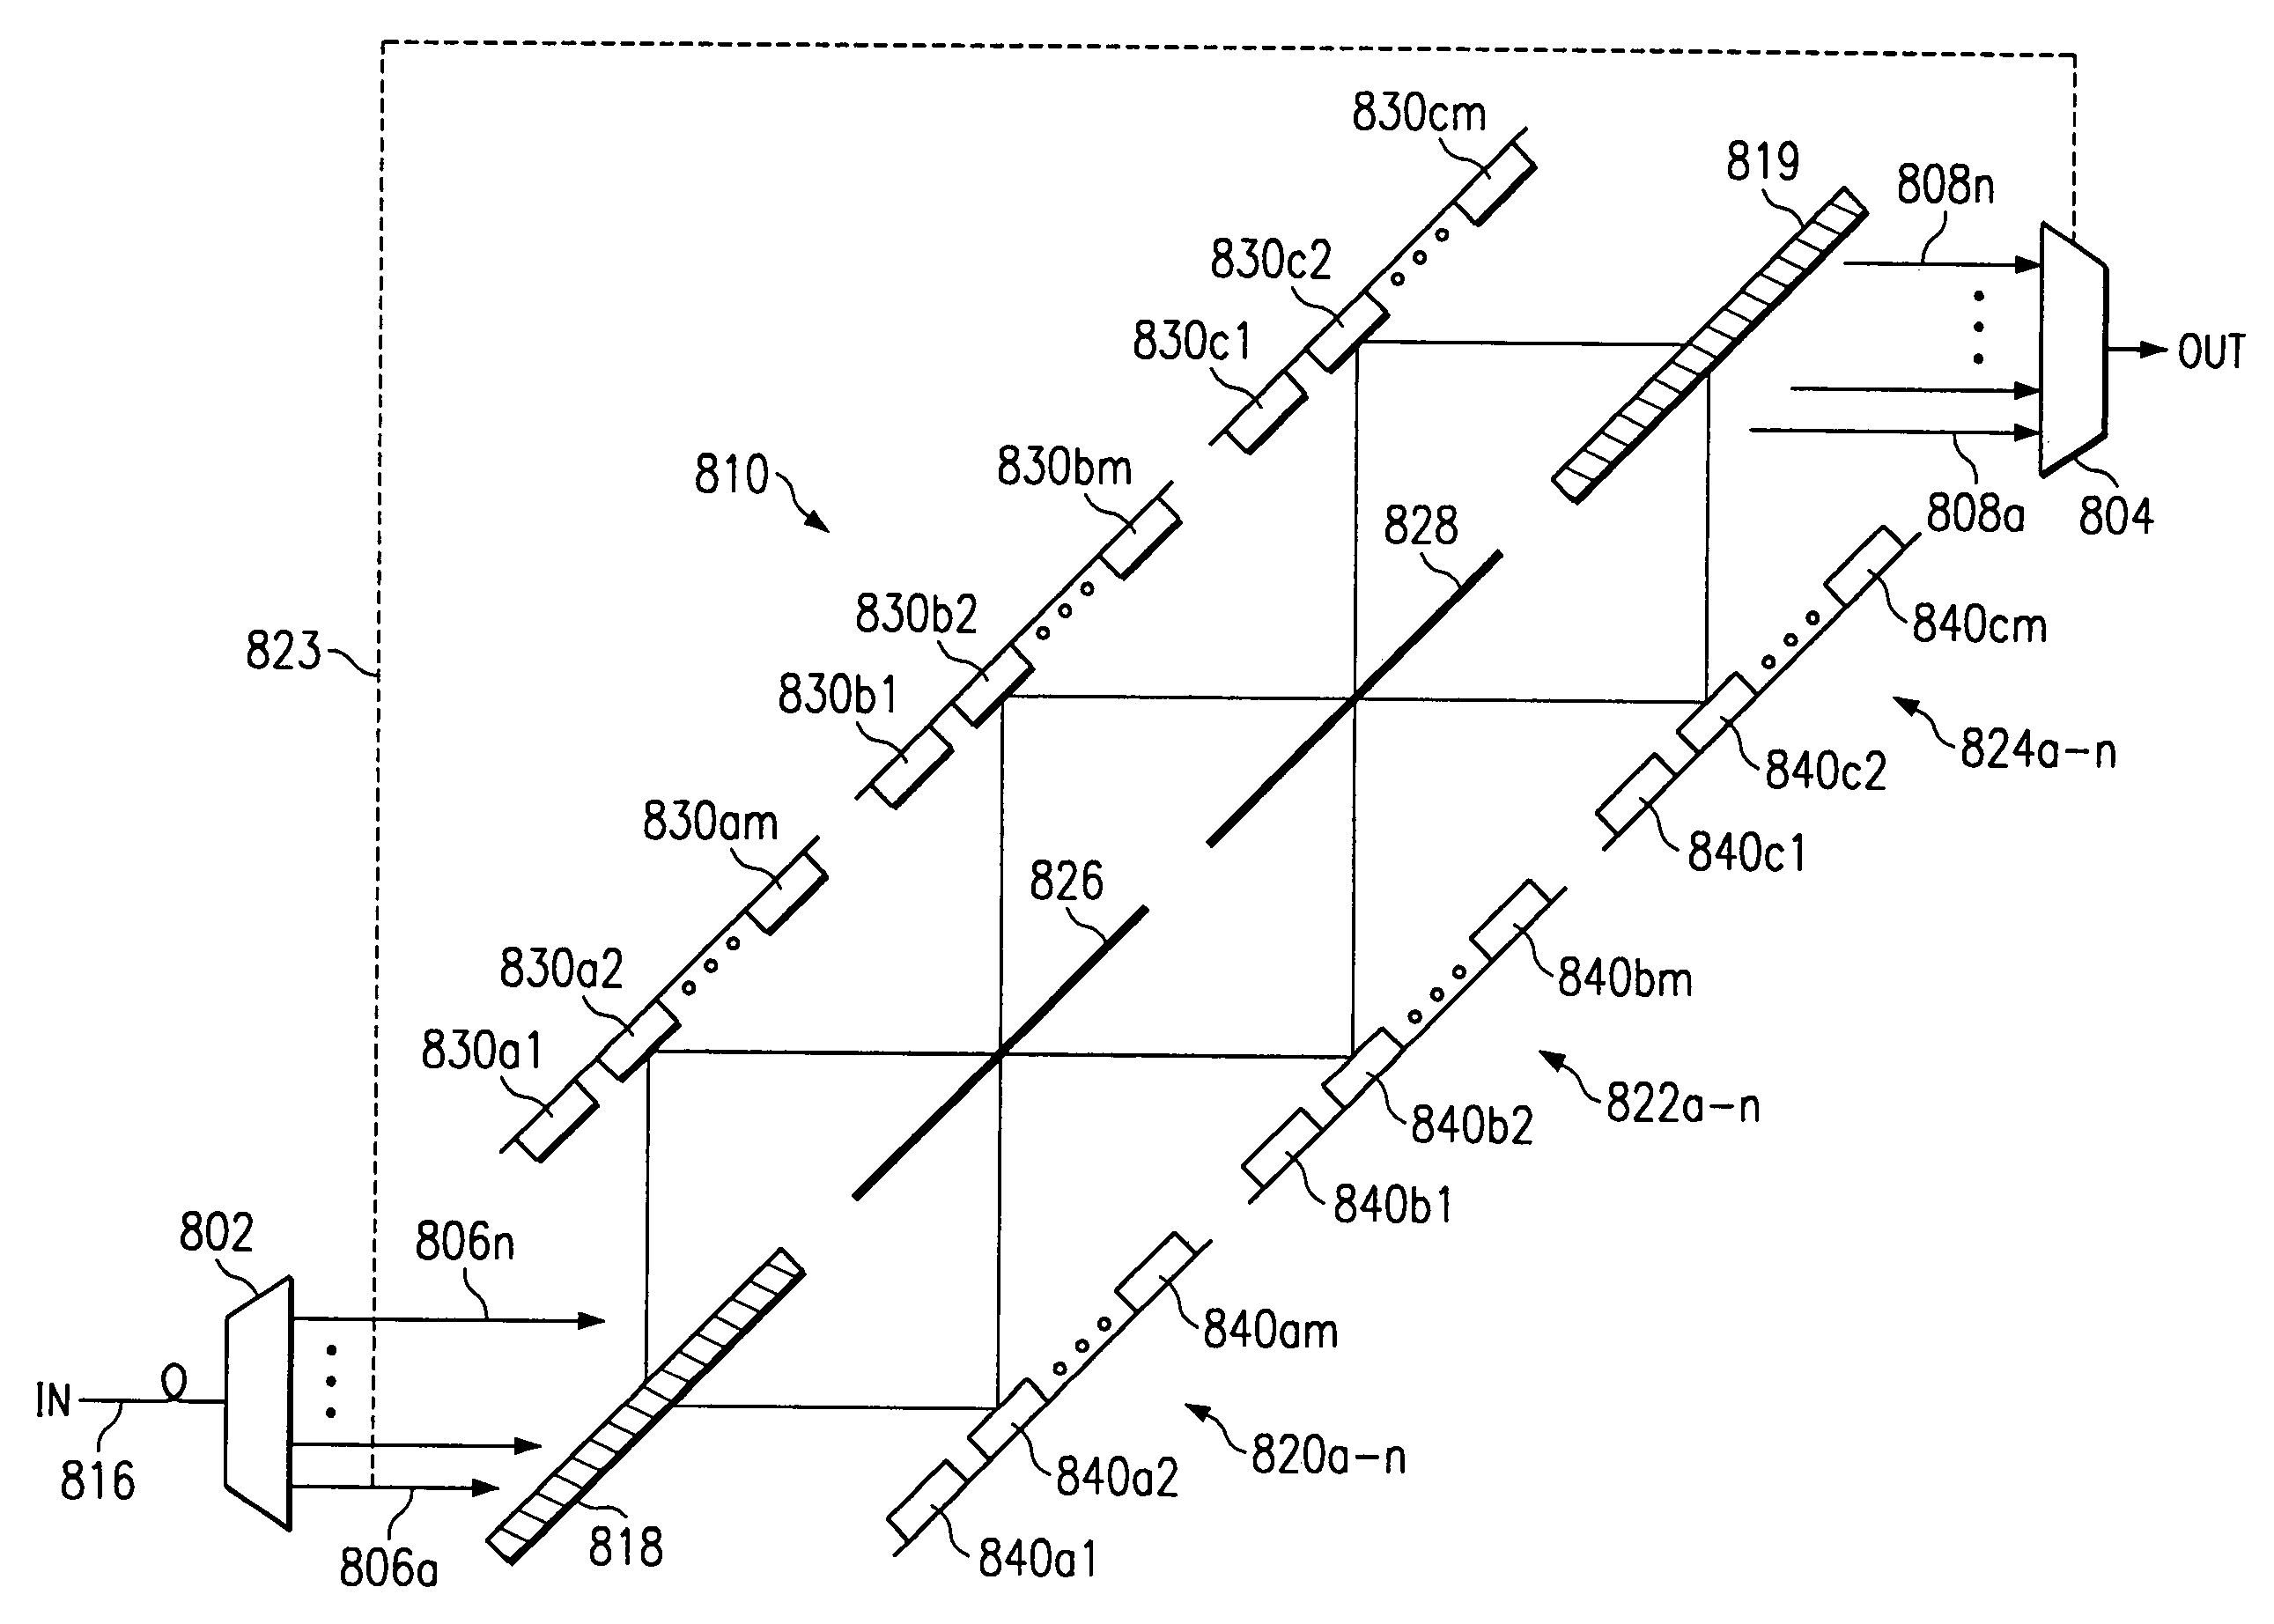 Apparatus and method for providing gain equalization